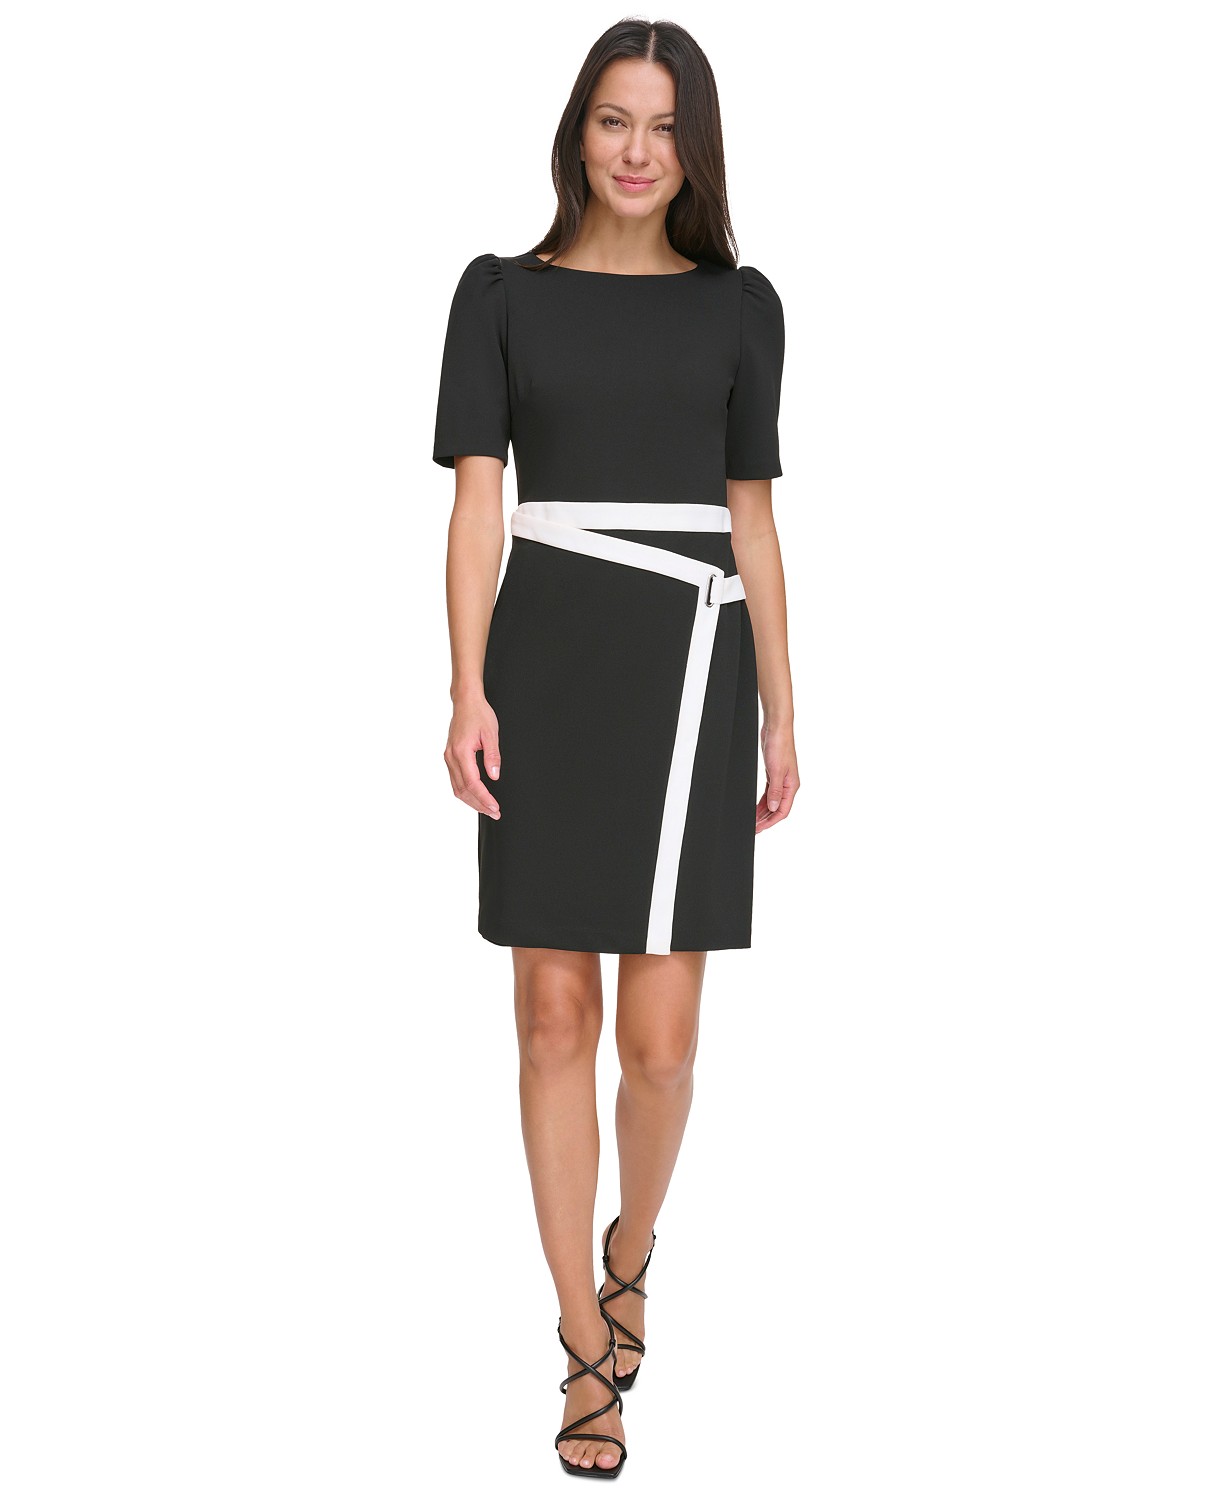 Womens Contrast Puff-Sleeve Boat-Neck Dress